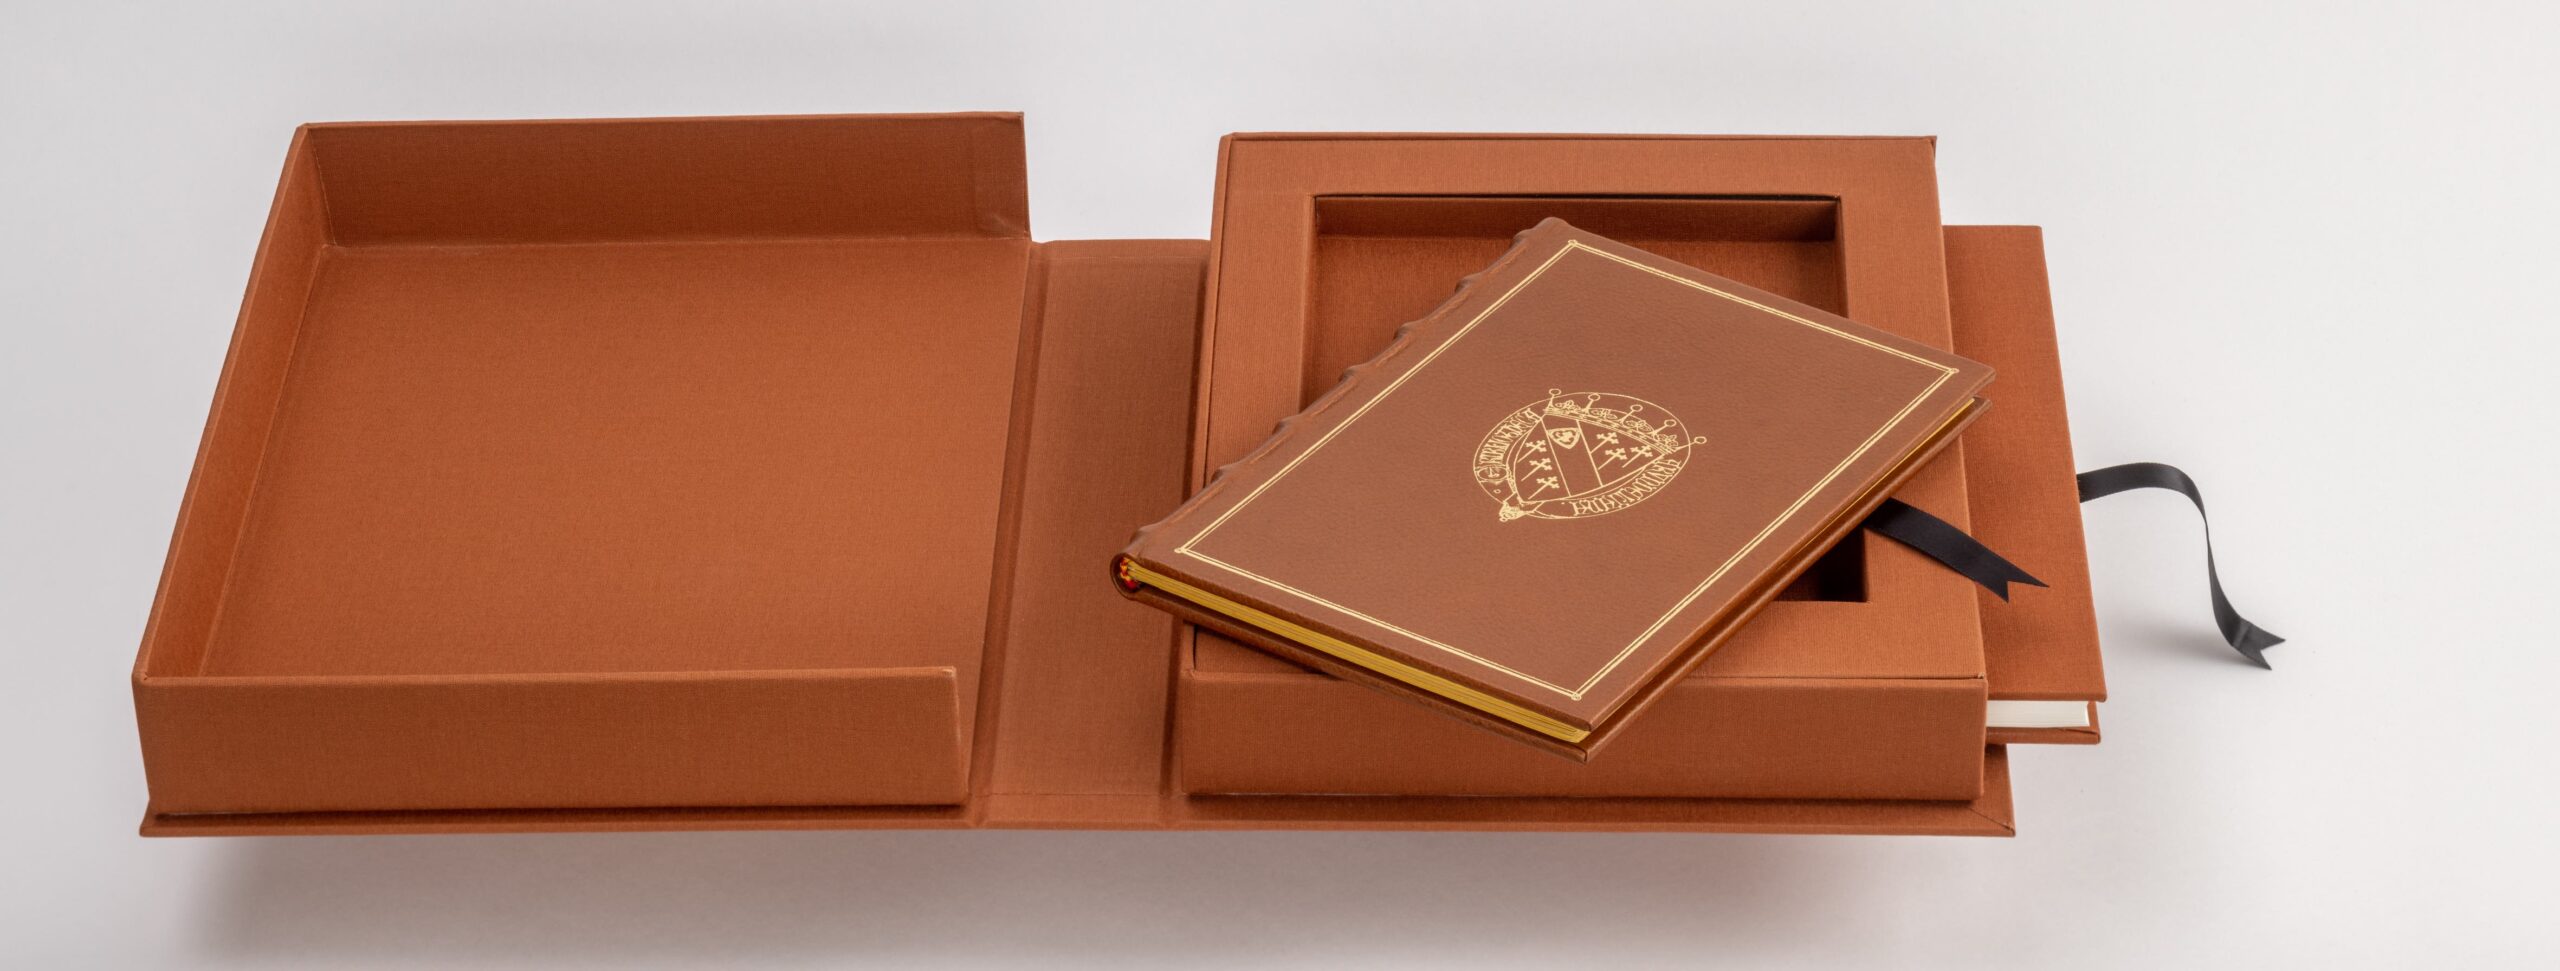 Facsimile edition of the Tabula Cebetis with open decorative cassette. The facsimile with gold-embossed leather binding lies diagonally on the cassette.